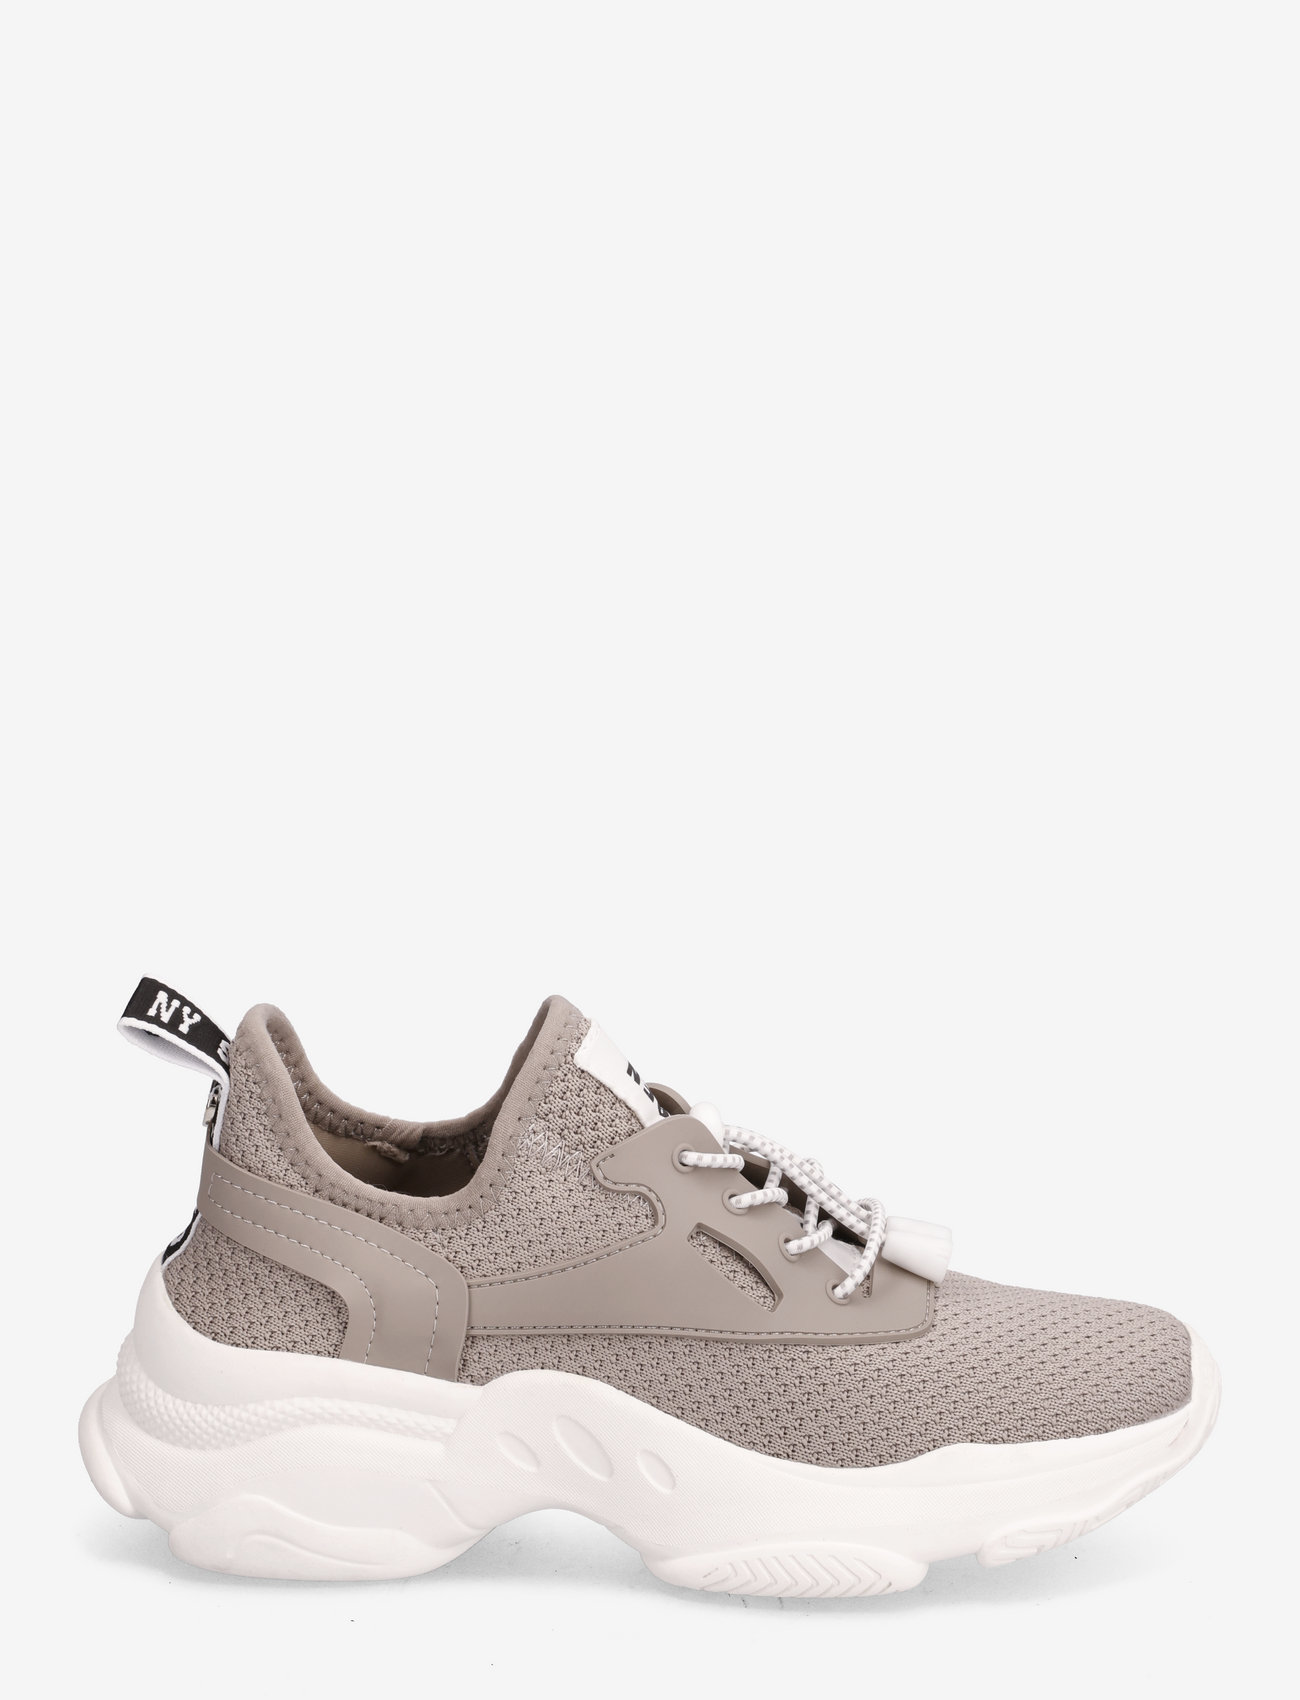 Steve Madden - Match-E Sneaker - lage sneakers - taupe - 1